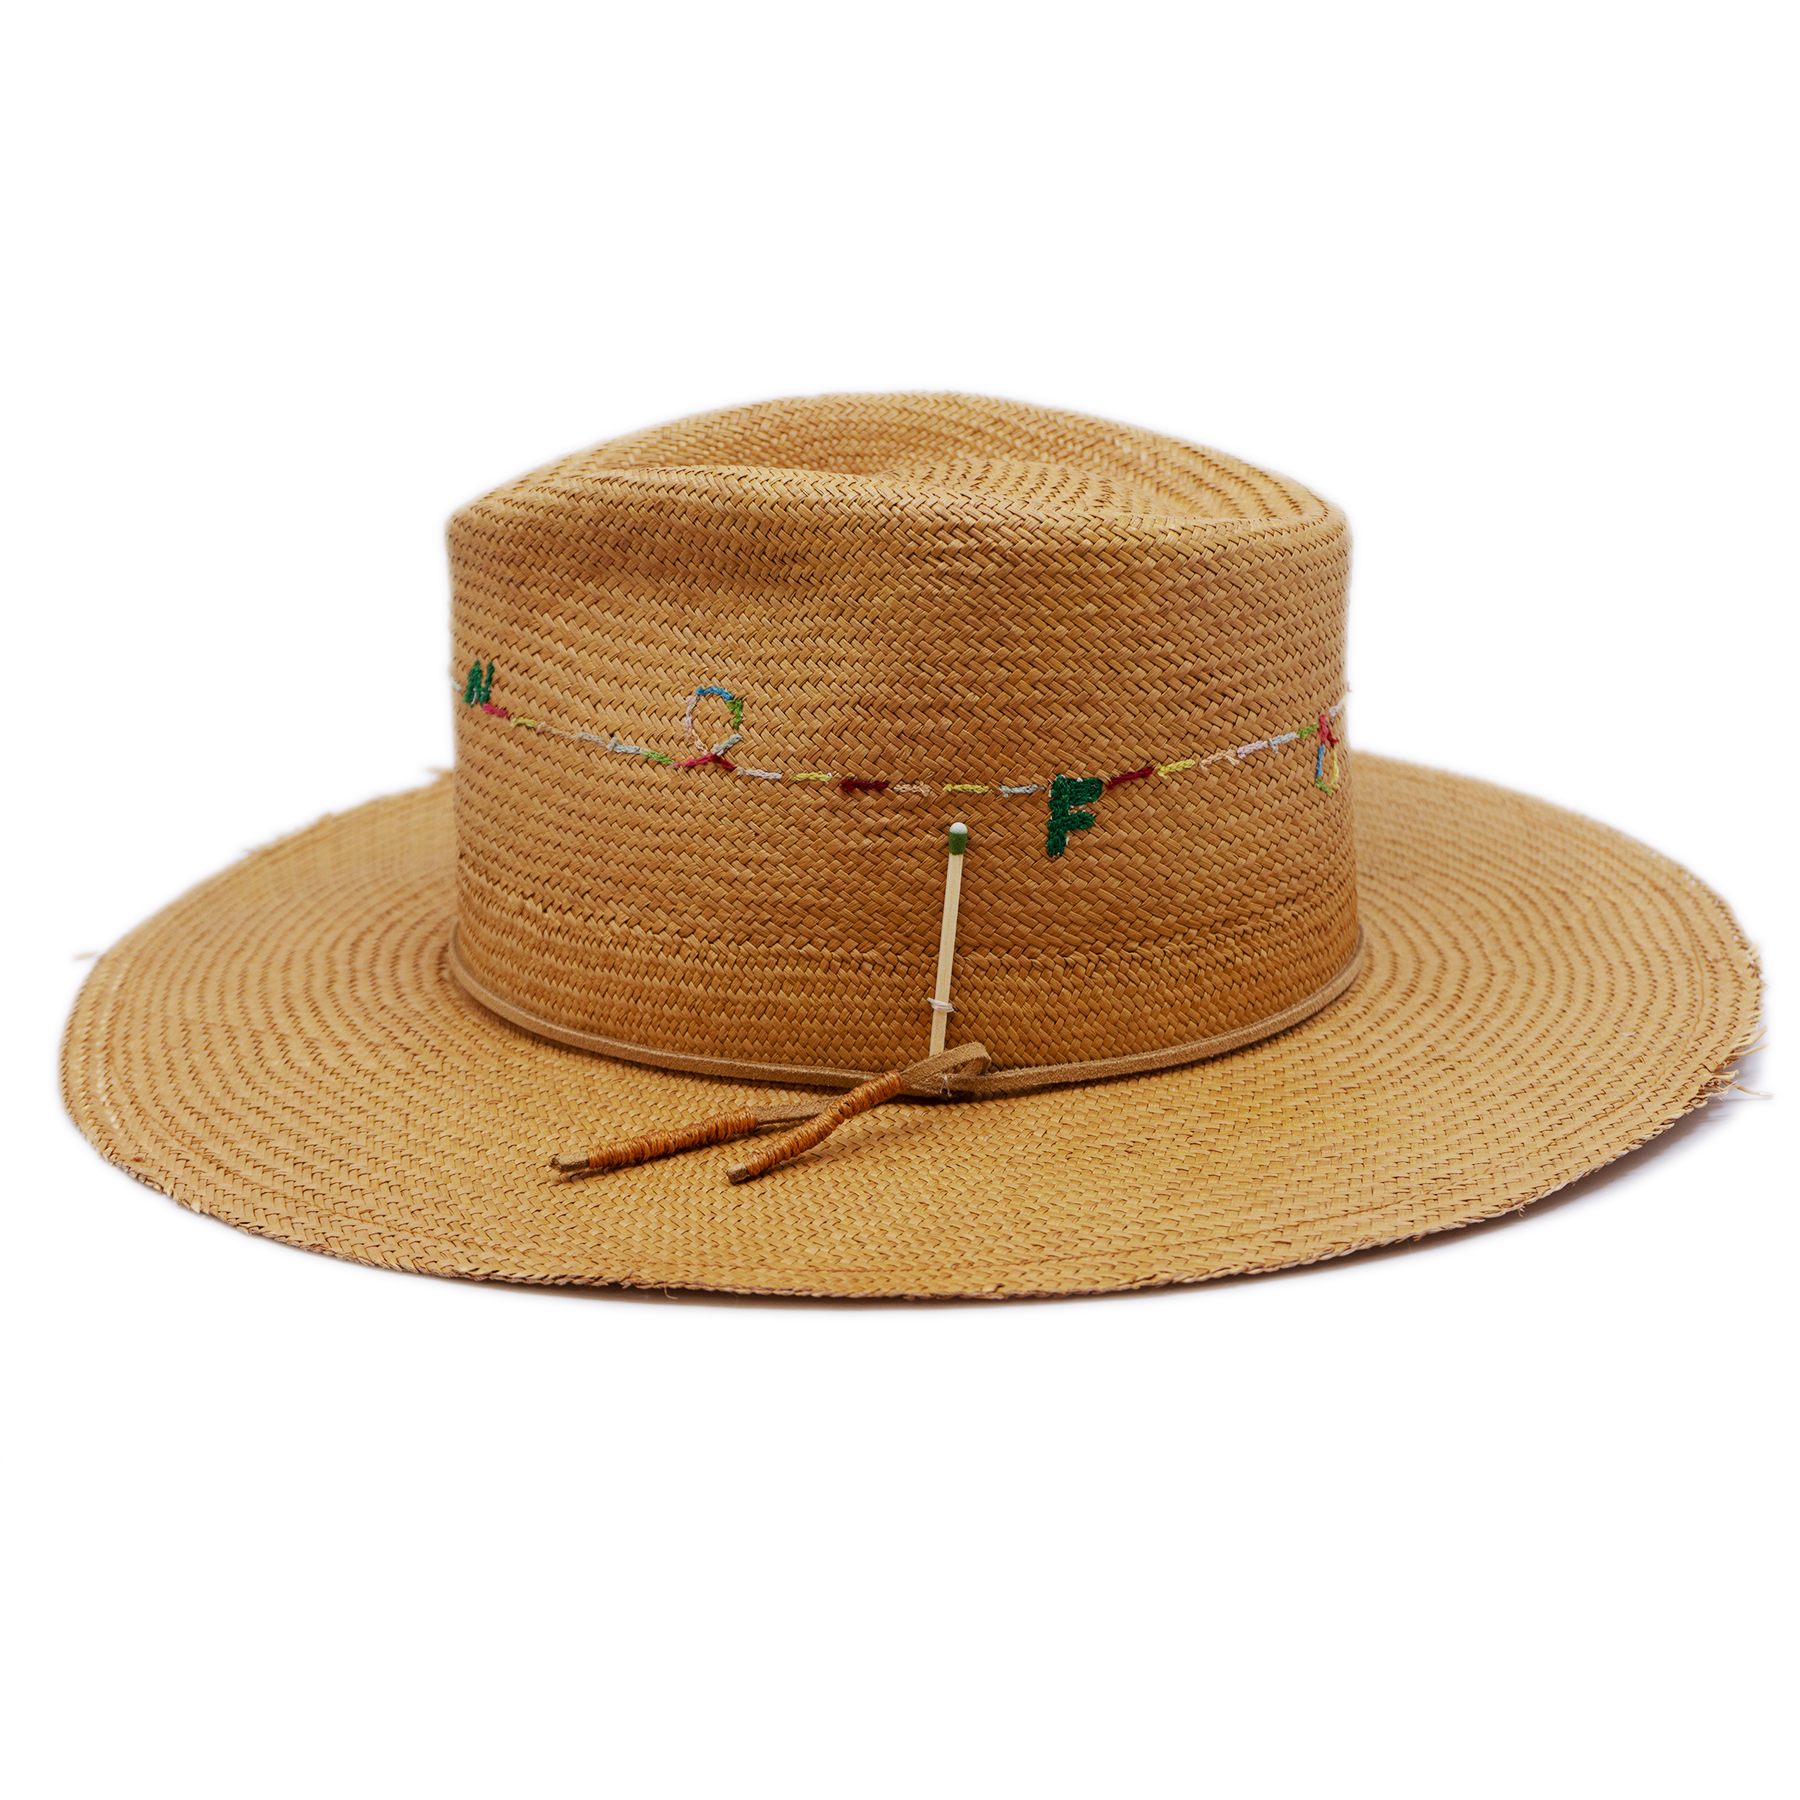 100% Ecuadorian straw in Natural Brown  Suede cord with japanese wax   thread ends band  Multicolor N—-F embroidery around crown   Woven in Ecuador  Lightly frayed brim  Made in USA  